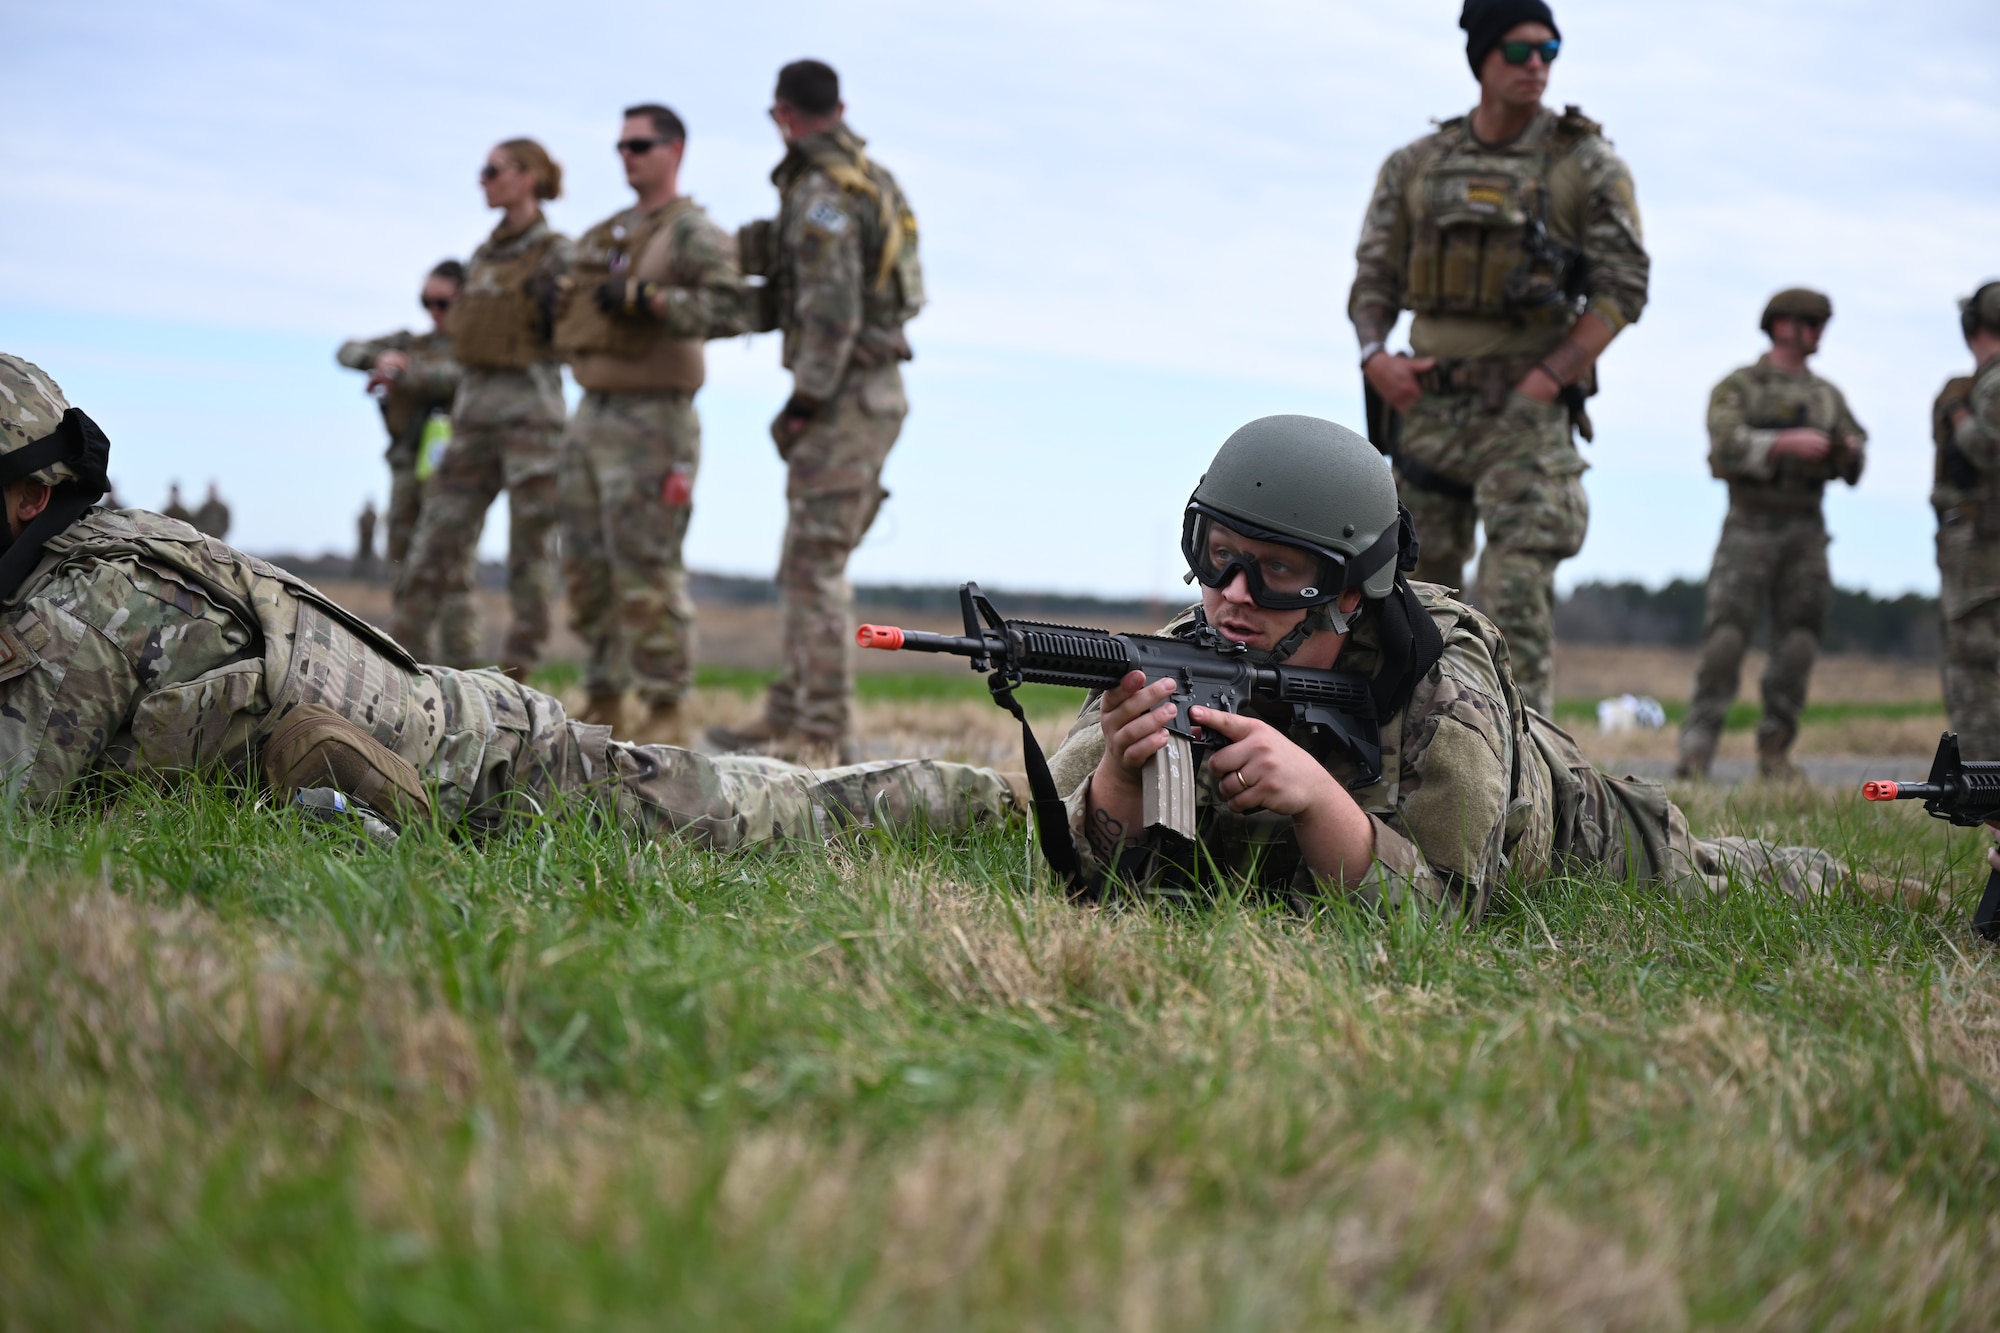 Team Little Rock Airmen participate in a battlefield readiness exercise at the Warrior Airmen Readiness Center